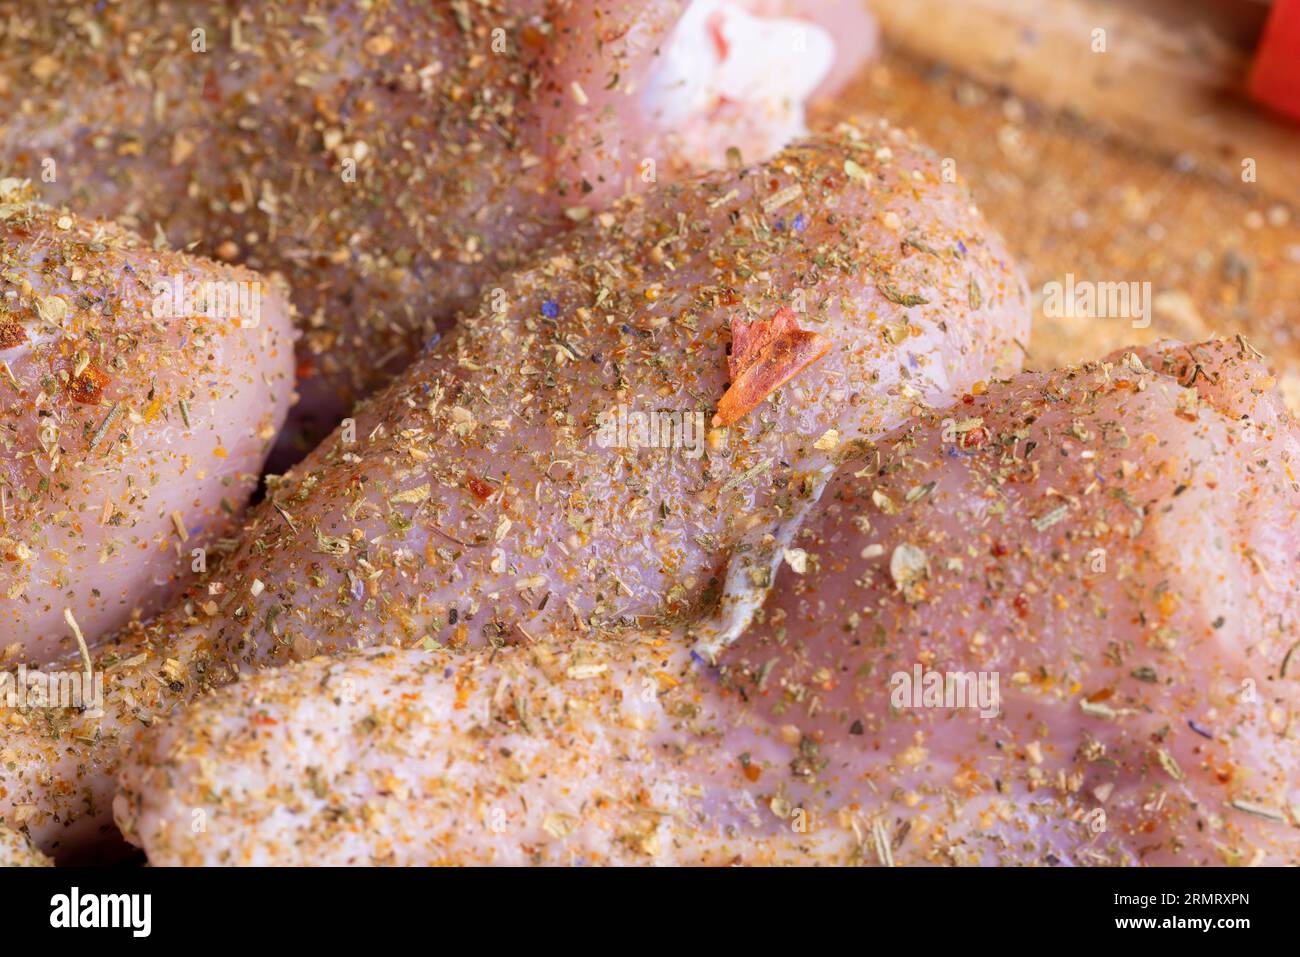 Freshly washed and skinned chicken meat, chicken legs with salt and spices ready for cooking Stock Photo